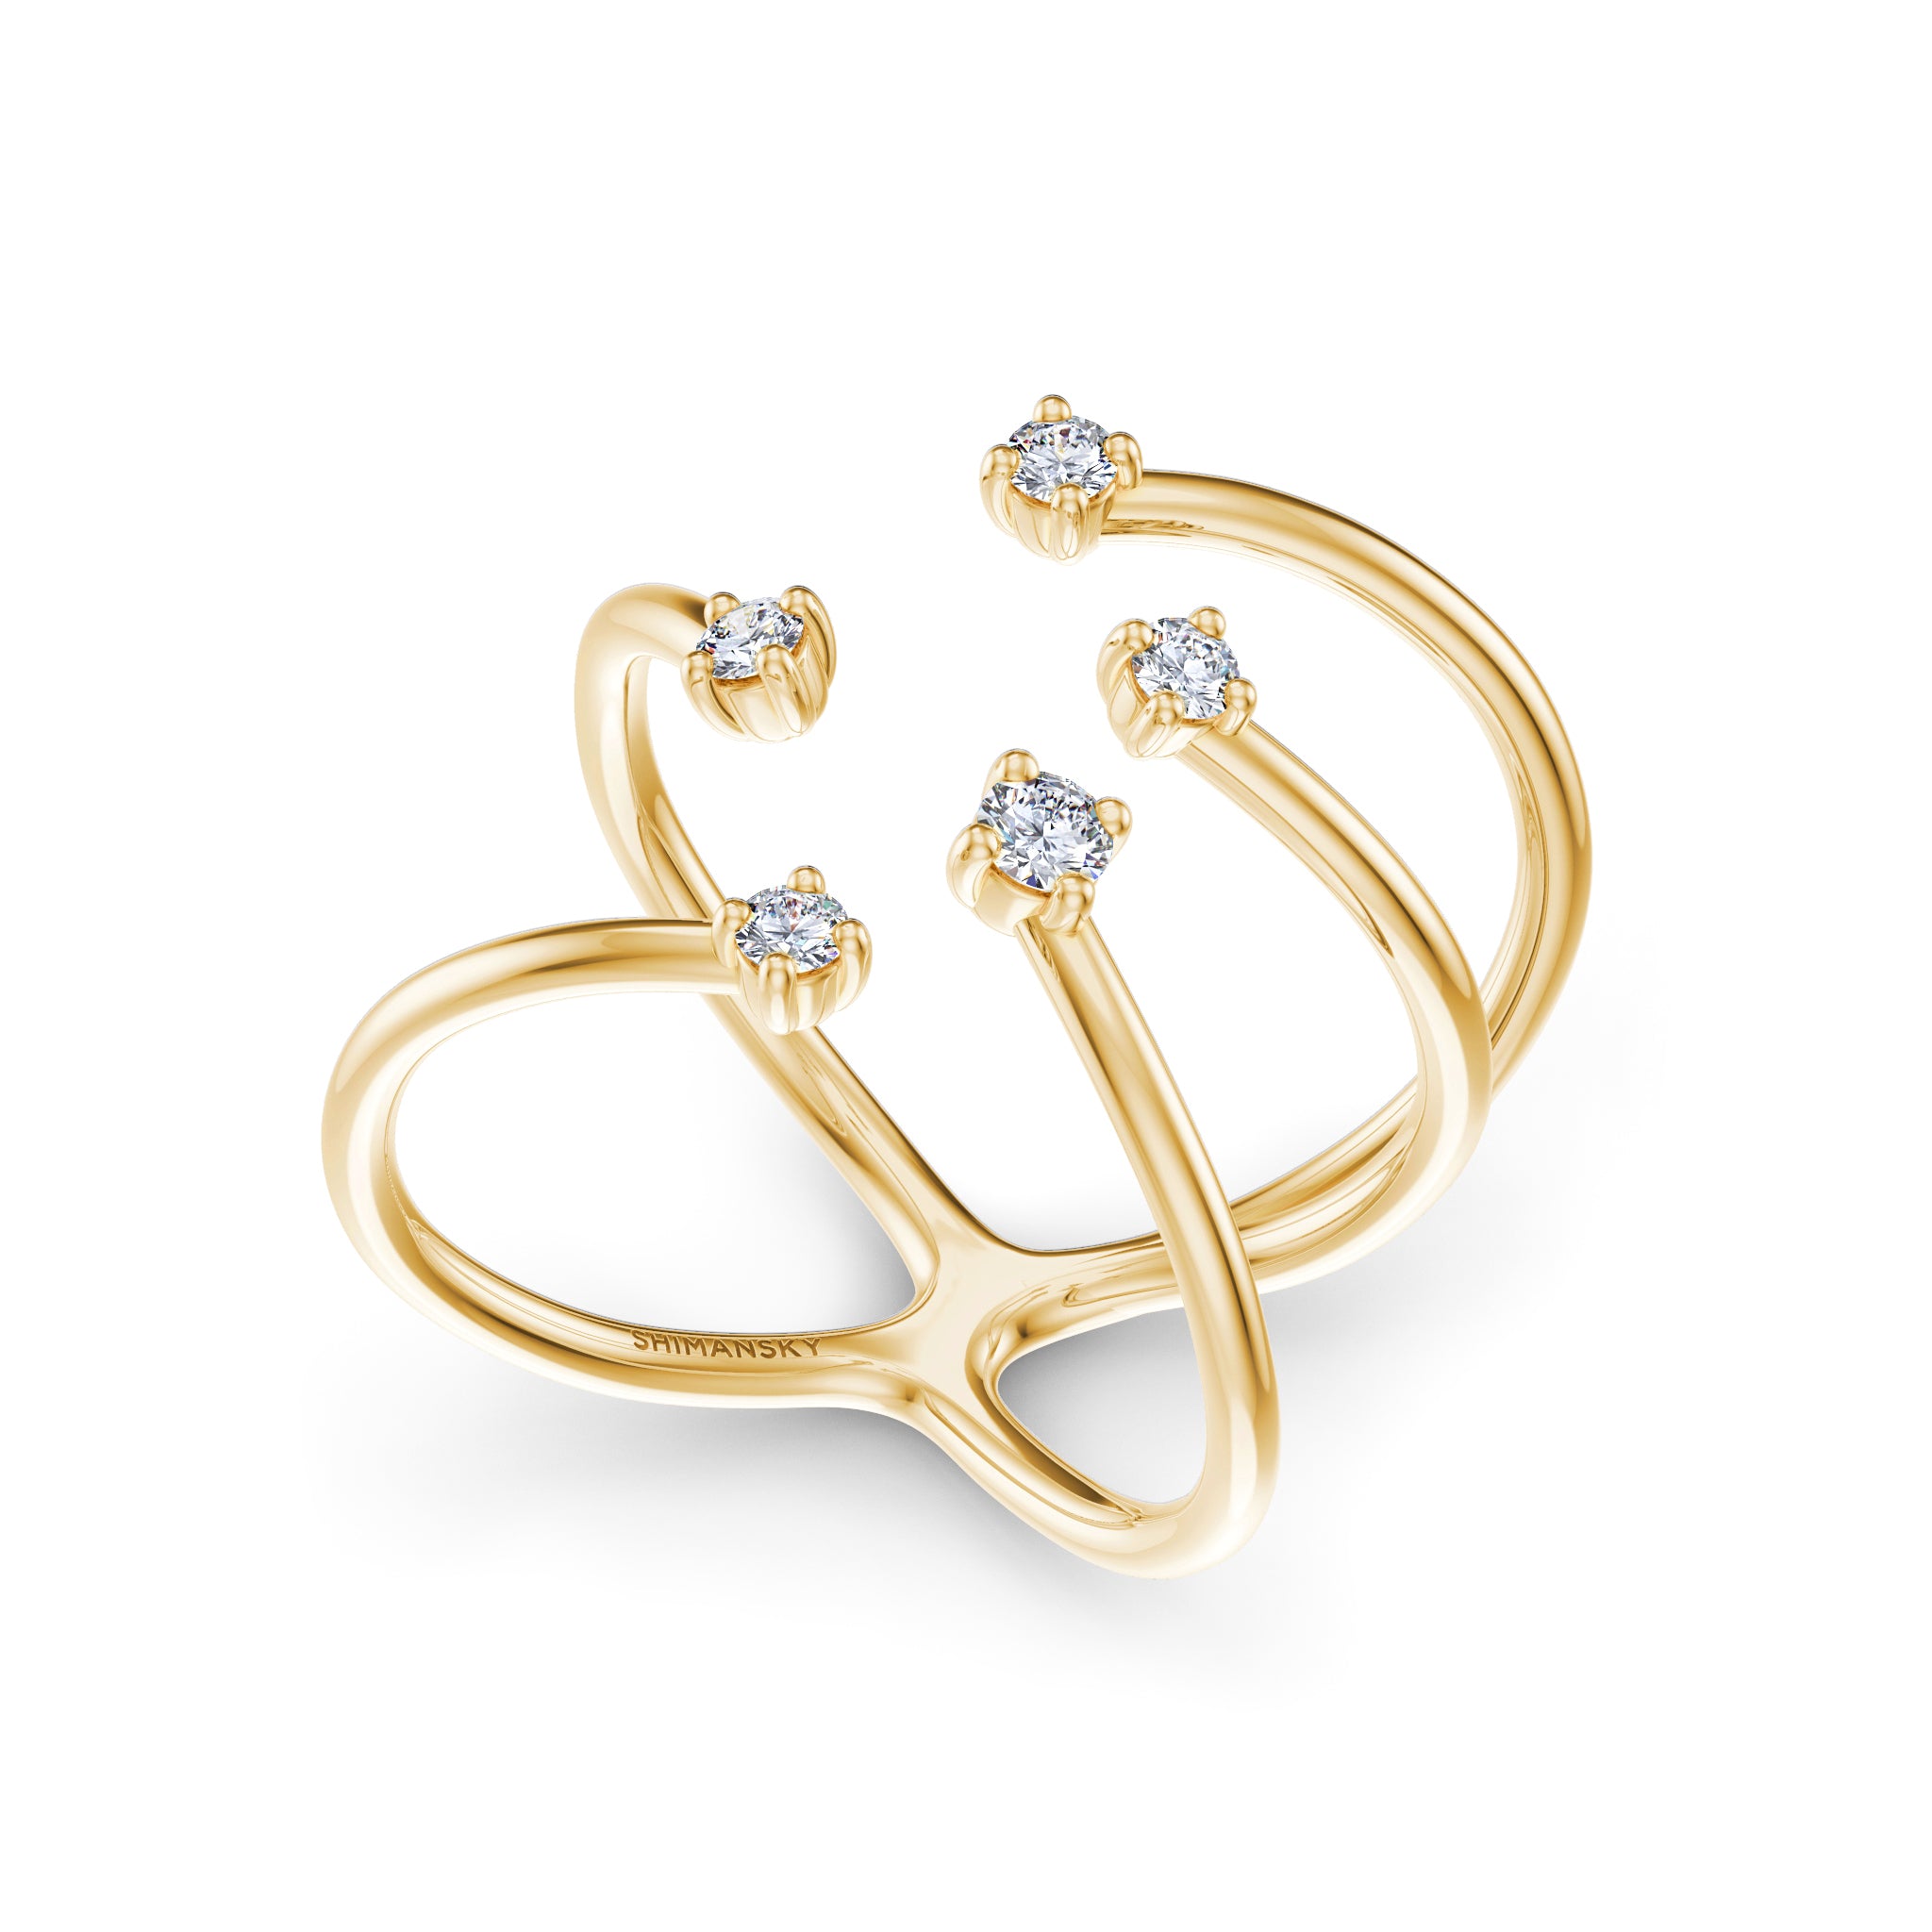 Shimansky - Southern Cross Small Diamond Ring Crafted in 14K Yellow Gold